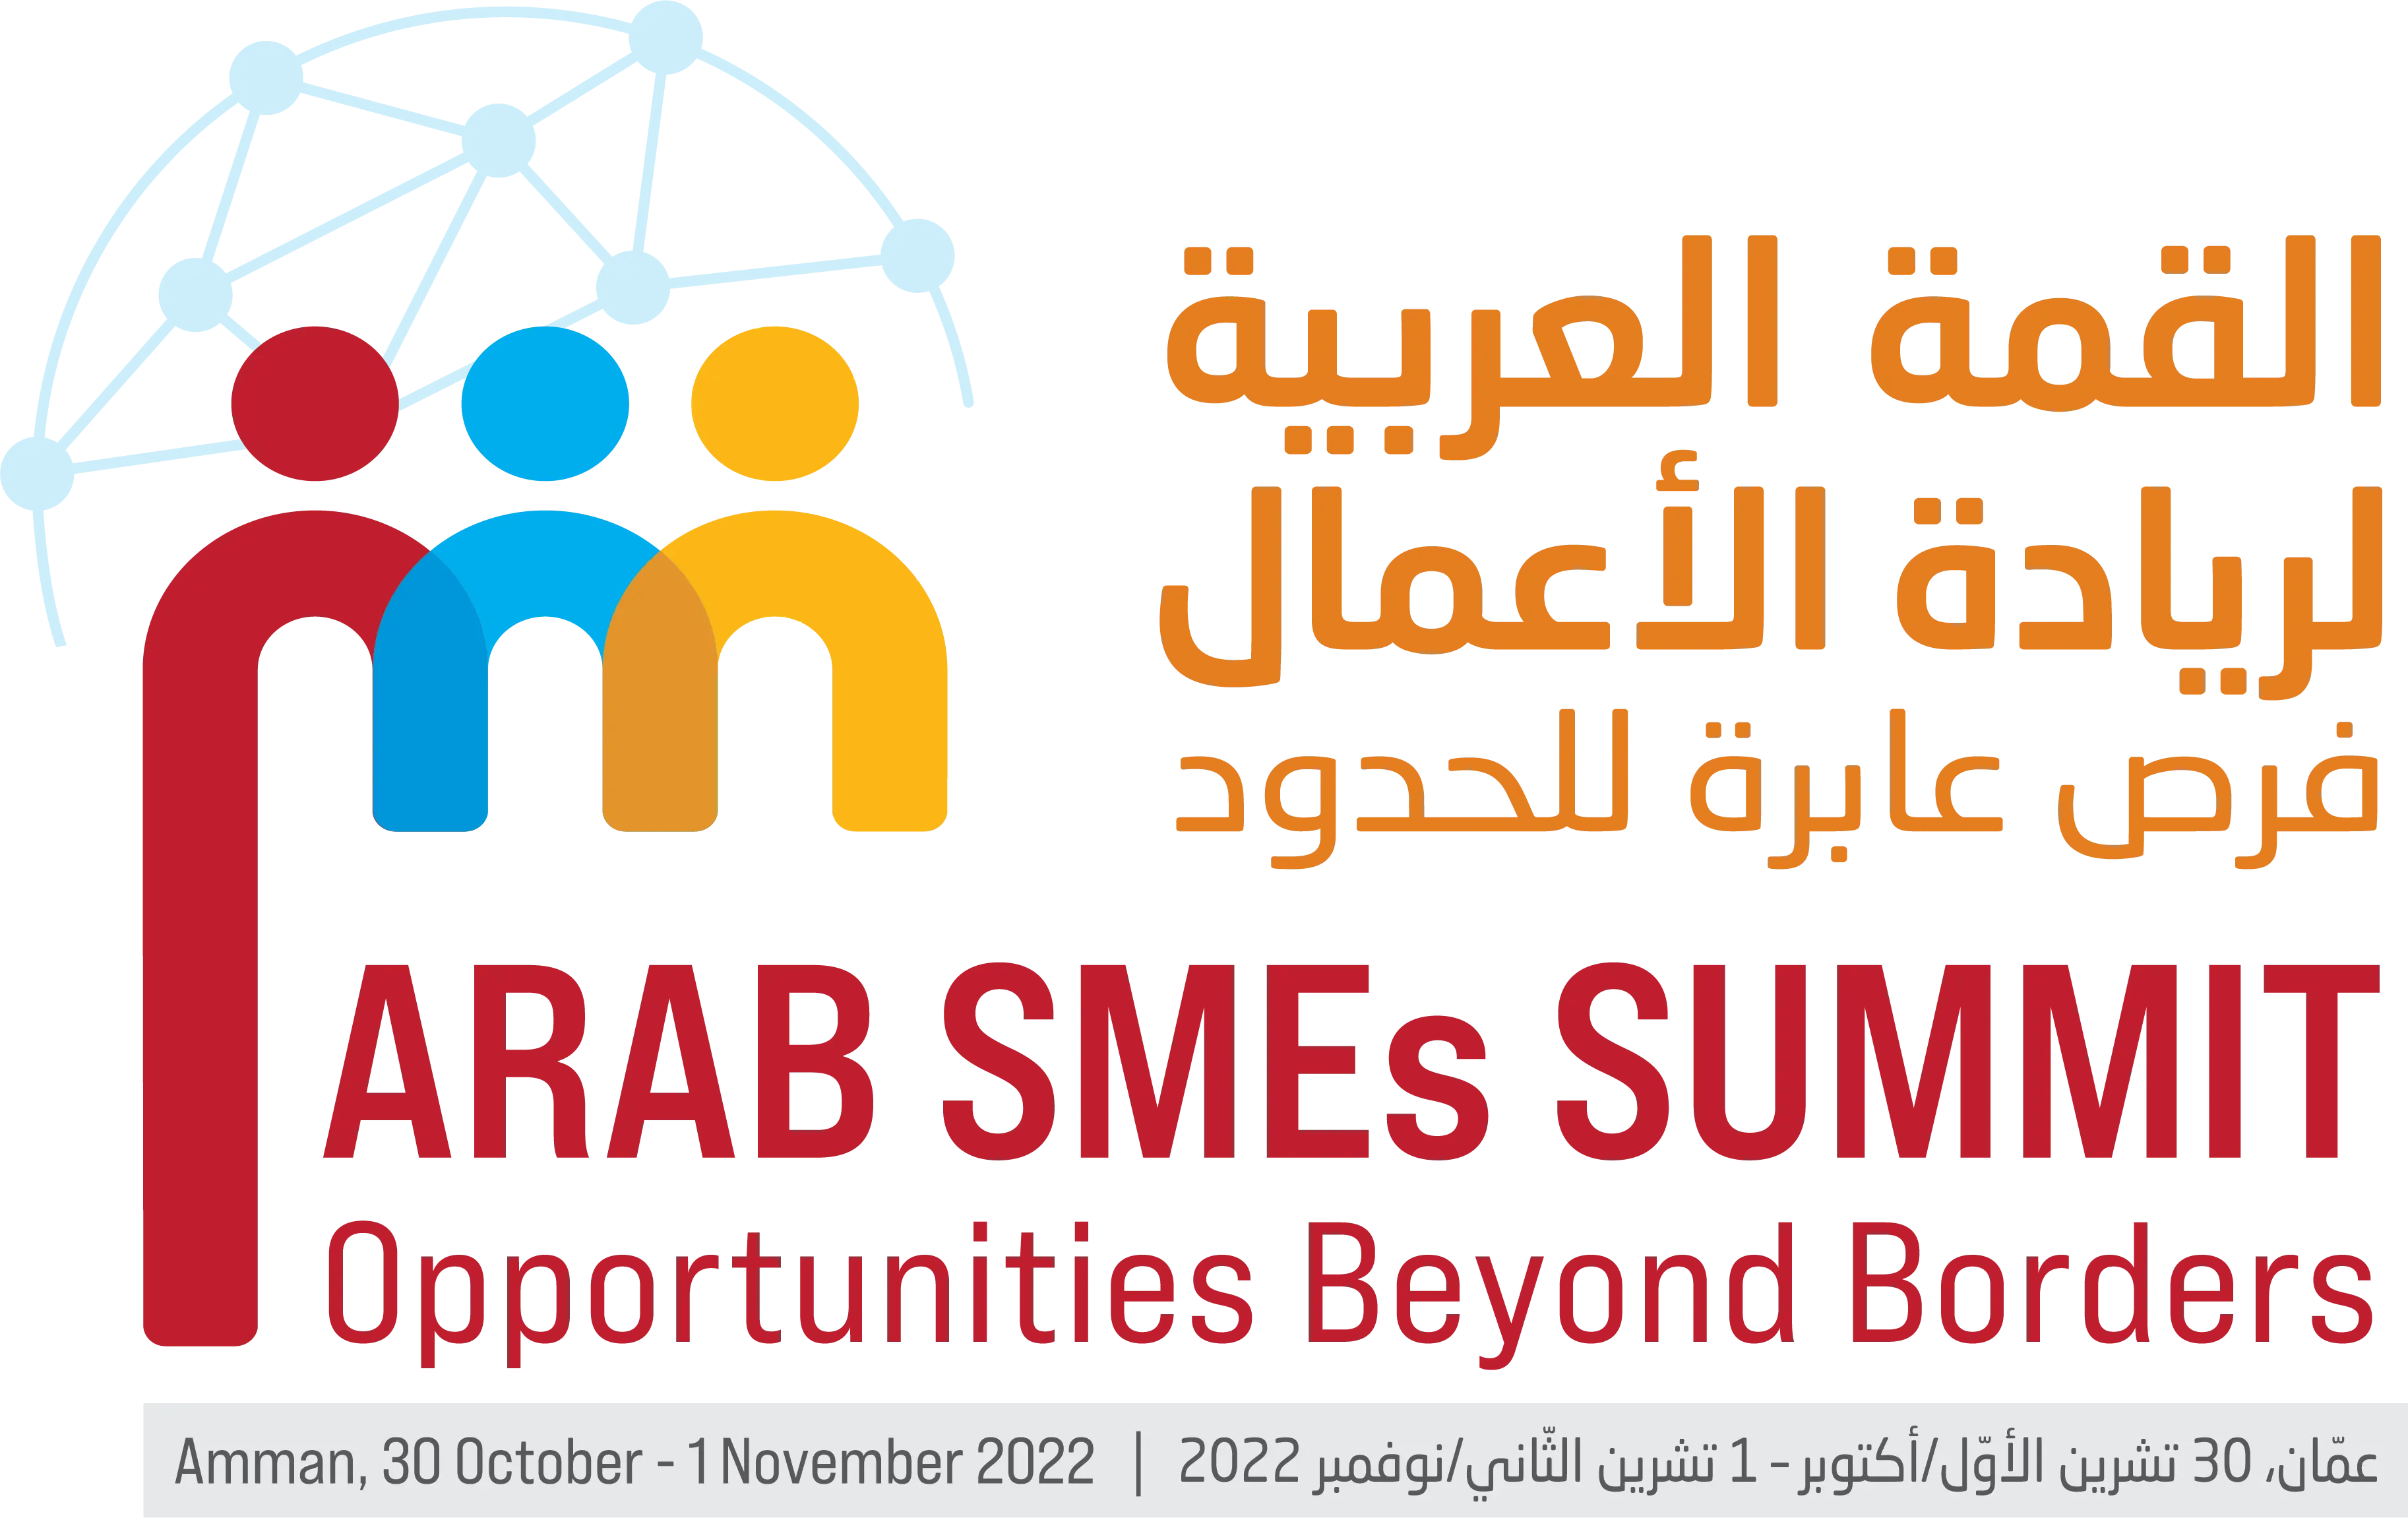 Arab SMEs Summit: Opportunities Beyond Borders